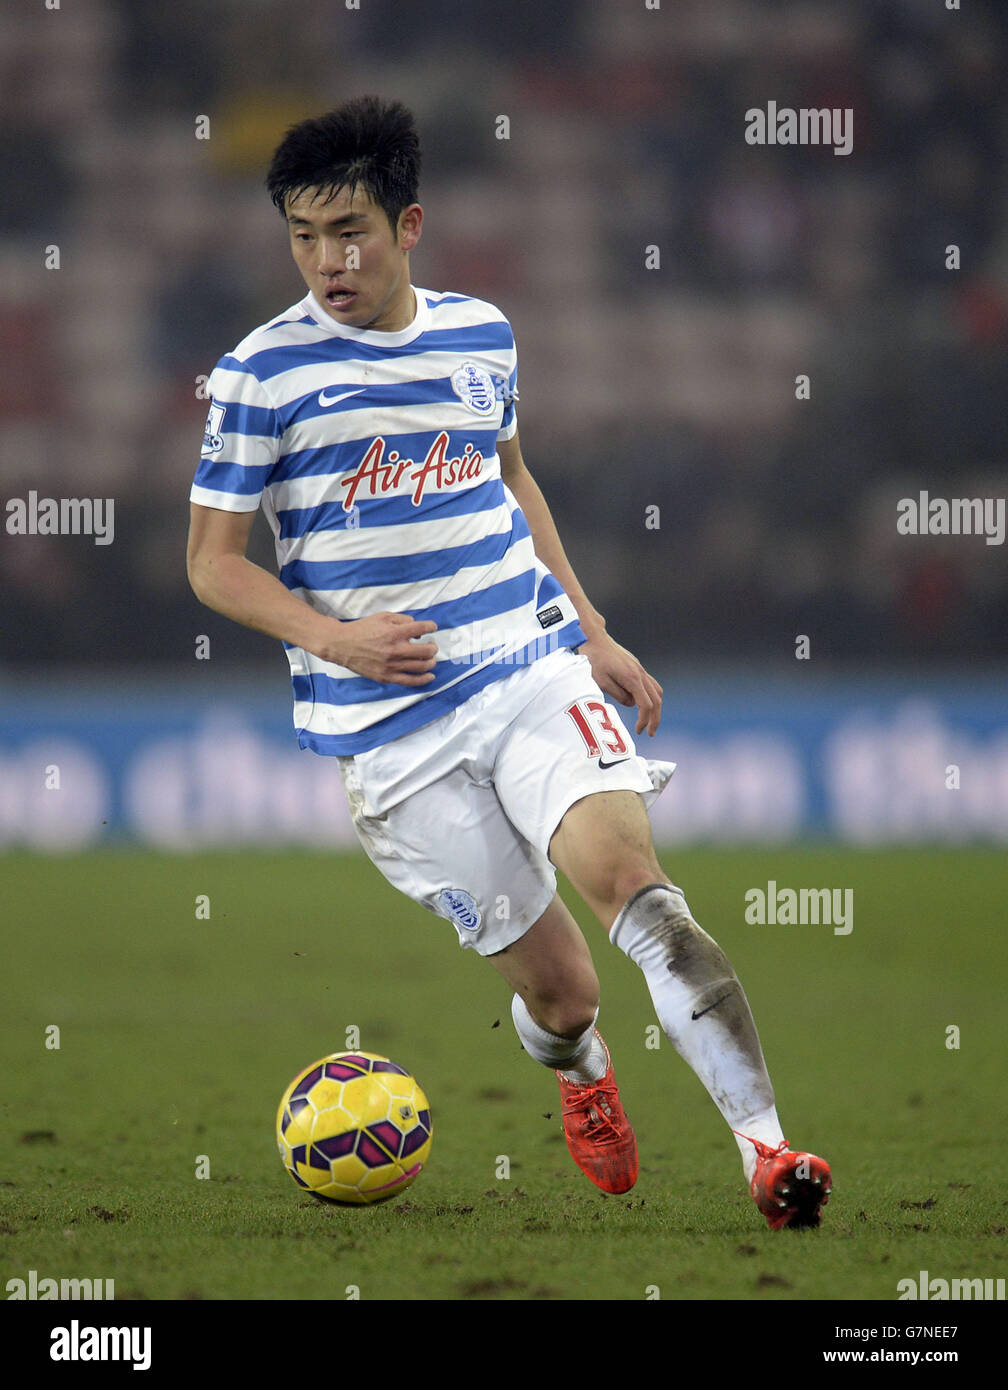 Queens park Rangers' Suk-Young Yun during the Barclays Premier League match at the Stadium of Light, Sunderland. Stock Photo